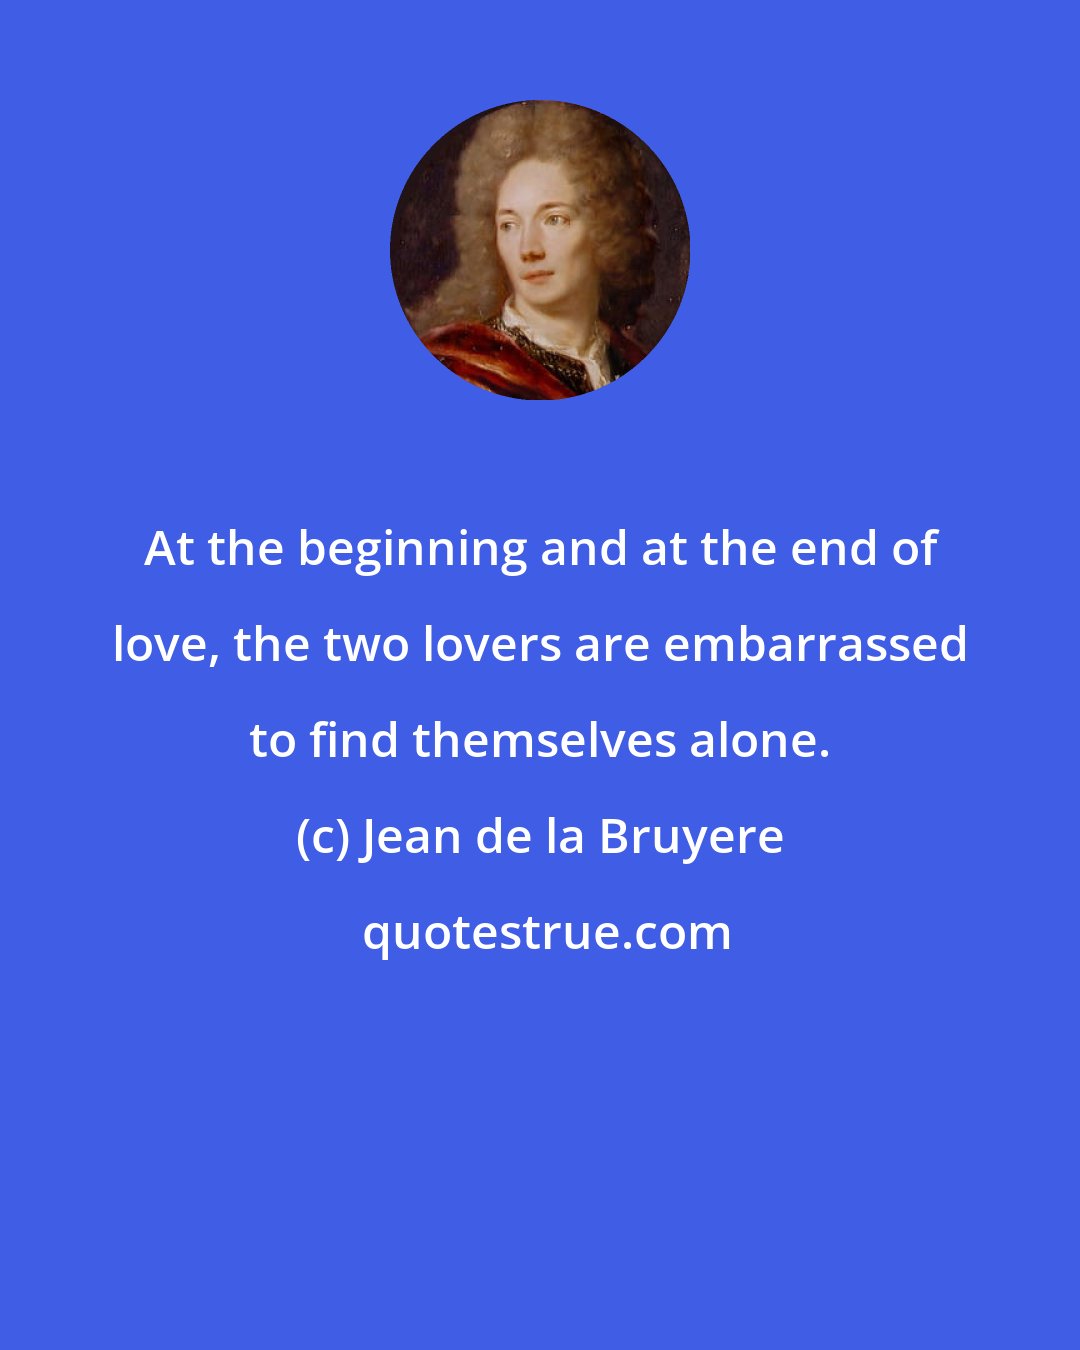 Jean de la Bruyere: At the beginning and at the end of love, the two lovers are embarrassed to find themselves alone.